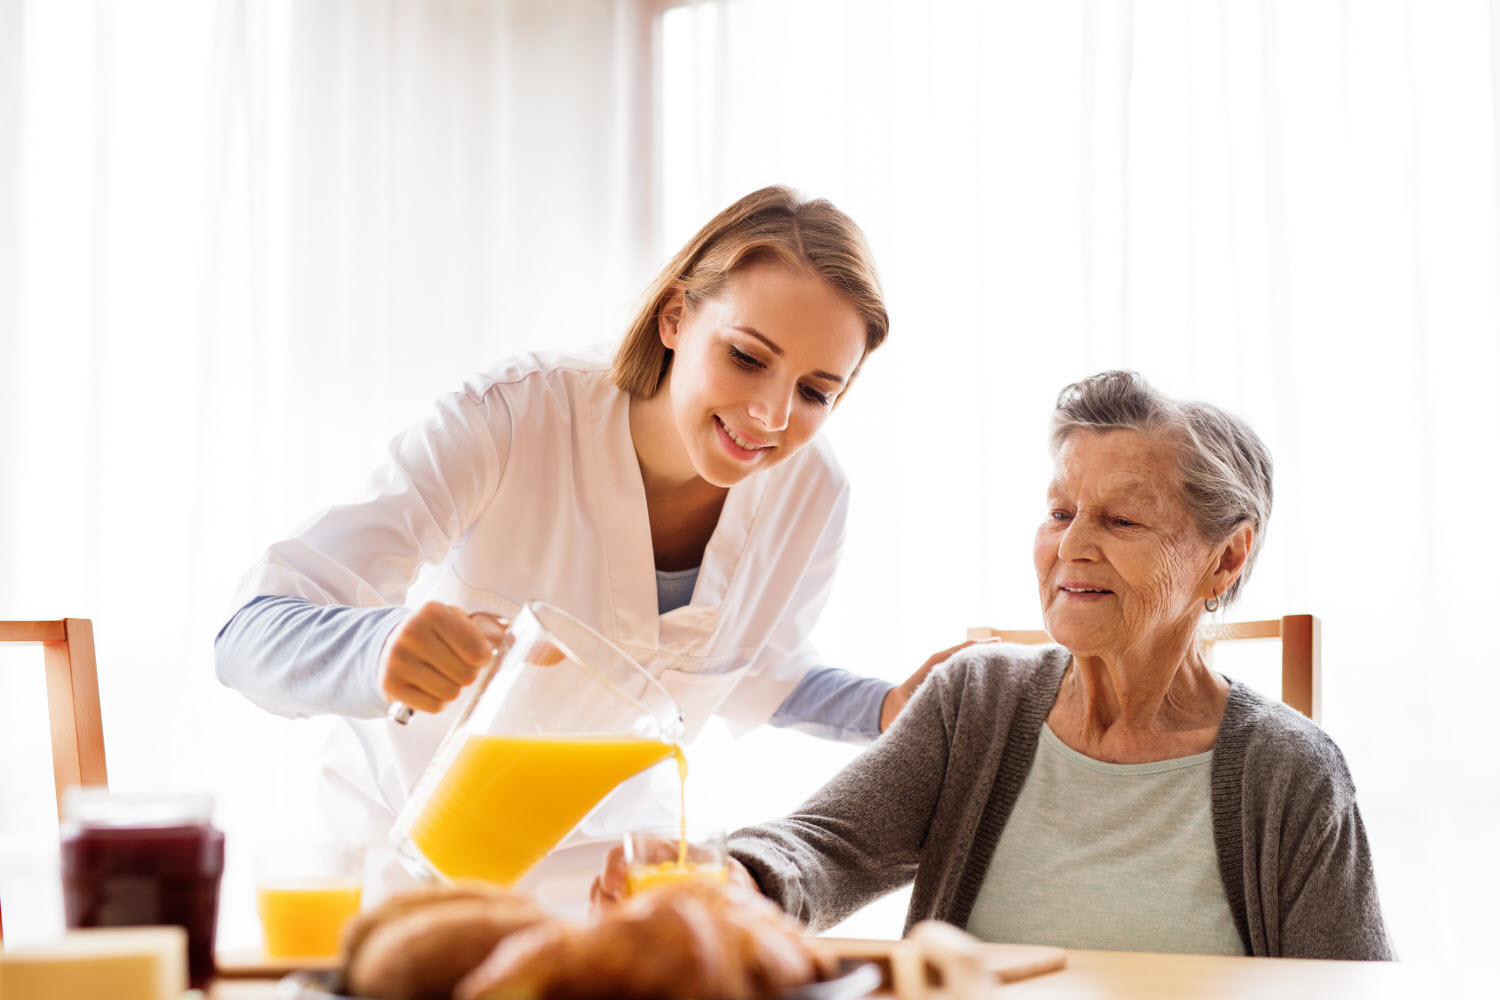 What is a Home Health Care Nurse?